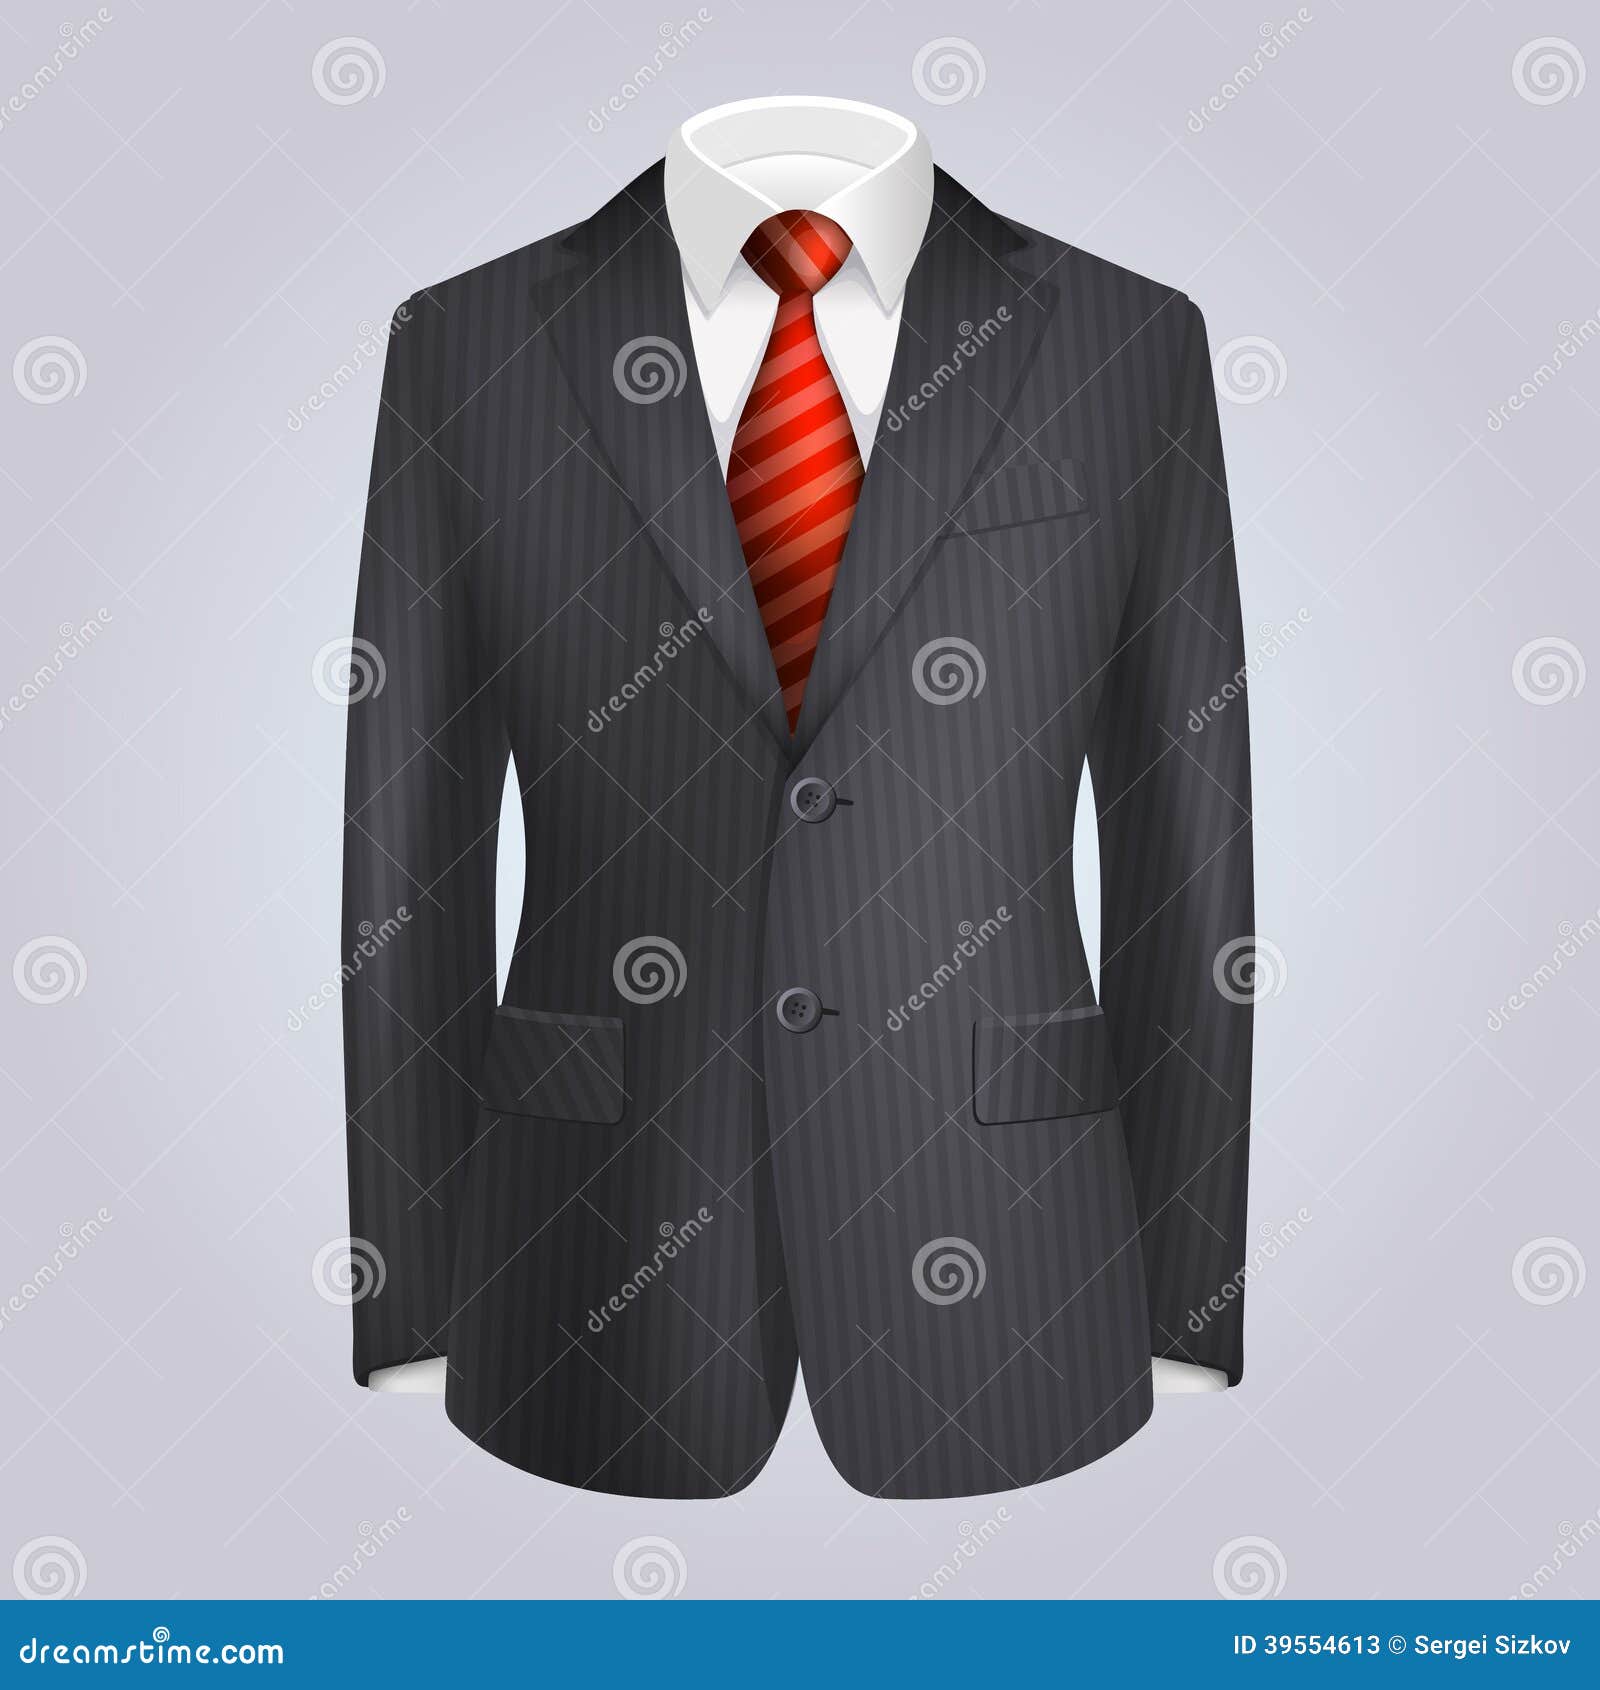 male clothing dark striped suit red tie vector illustration 39554613